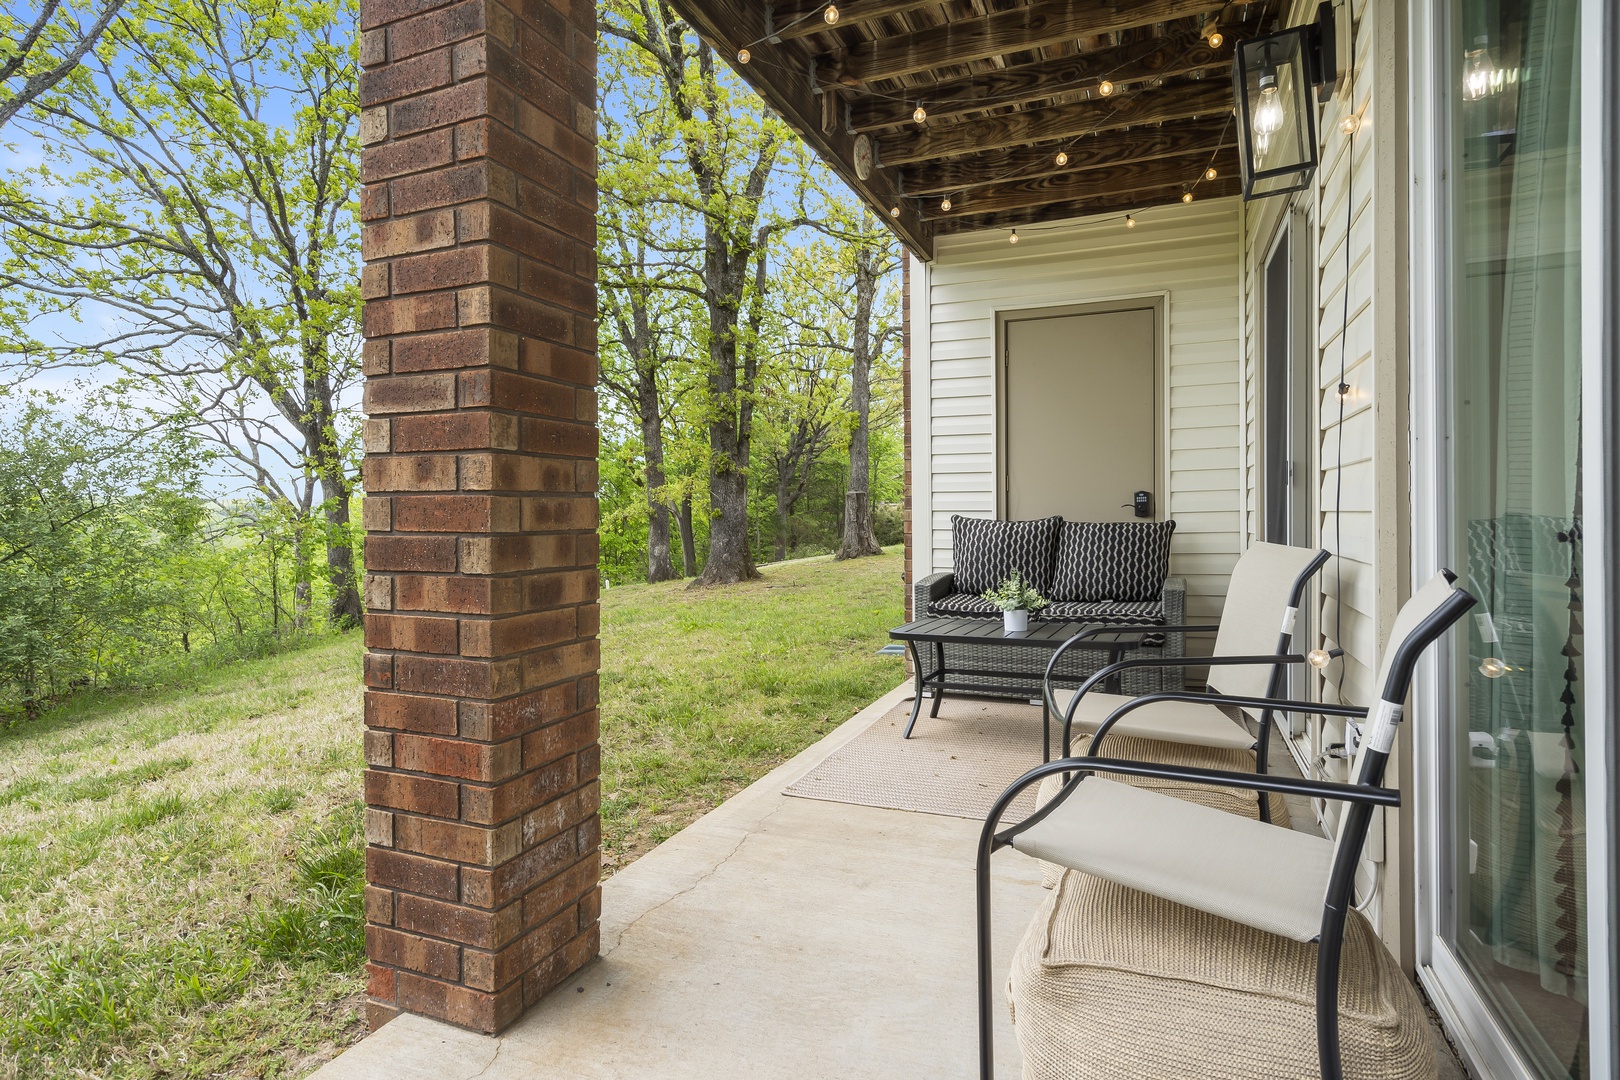 Unwind in the fresh air while soaking in the serene view from the patio